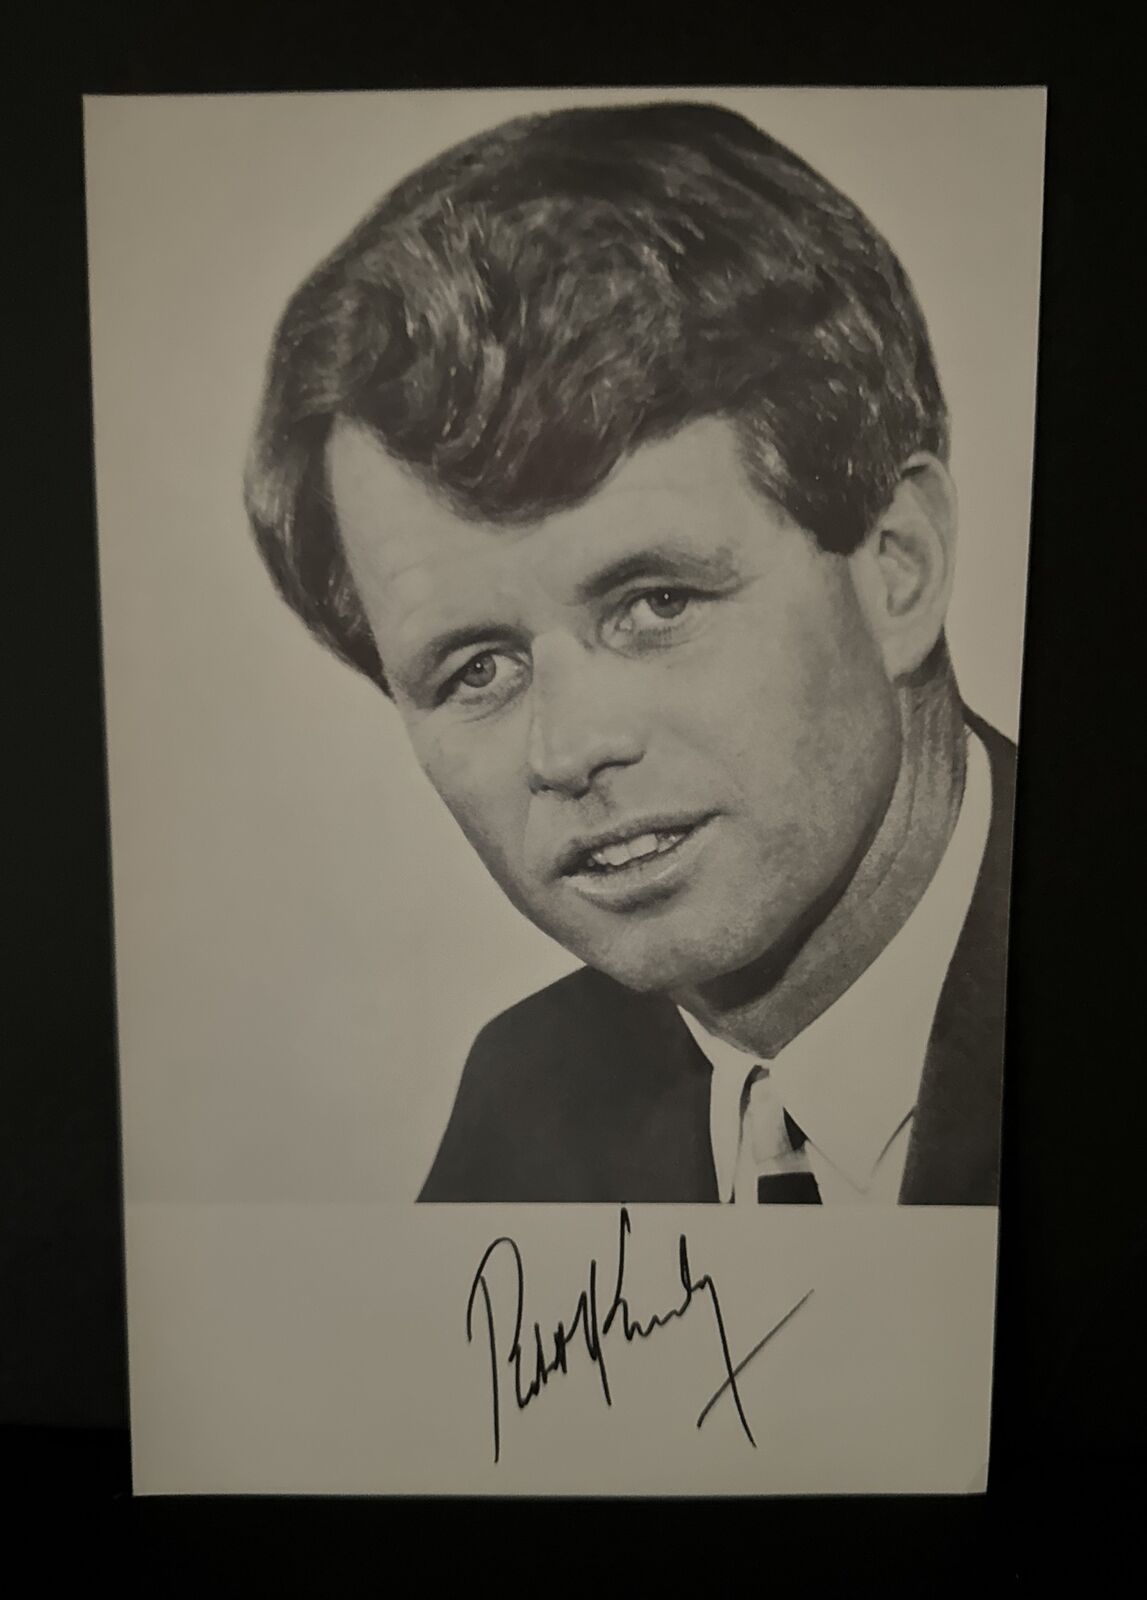 ROBERT F KENNEDY PRESIDENTIAL CAMPAIGN PHOTO CARD FLYER HAND OUT 1968 VINTAGE